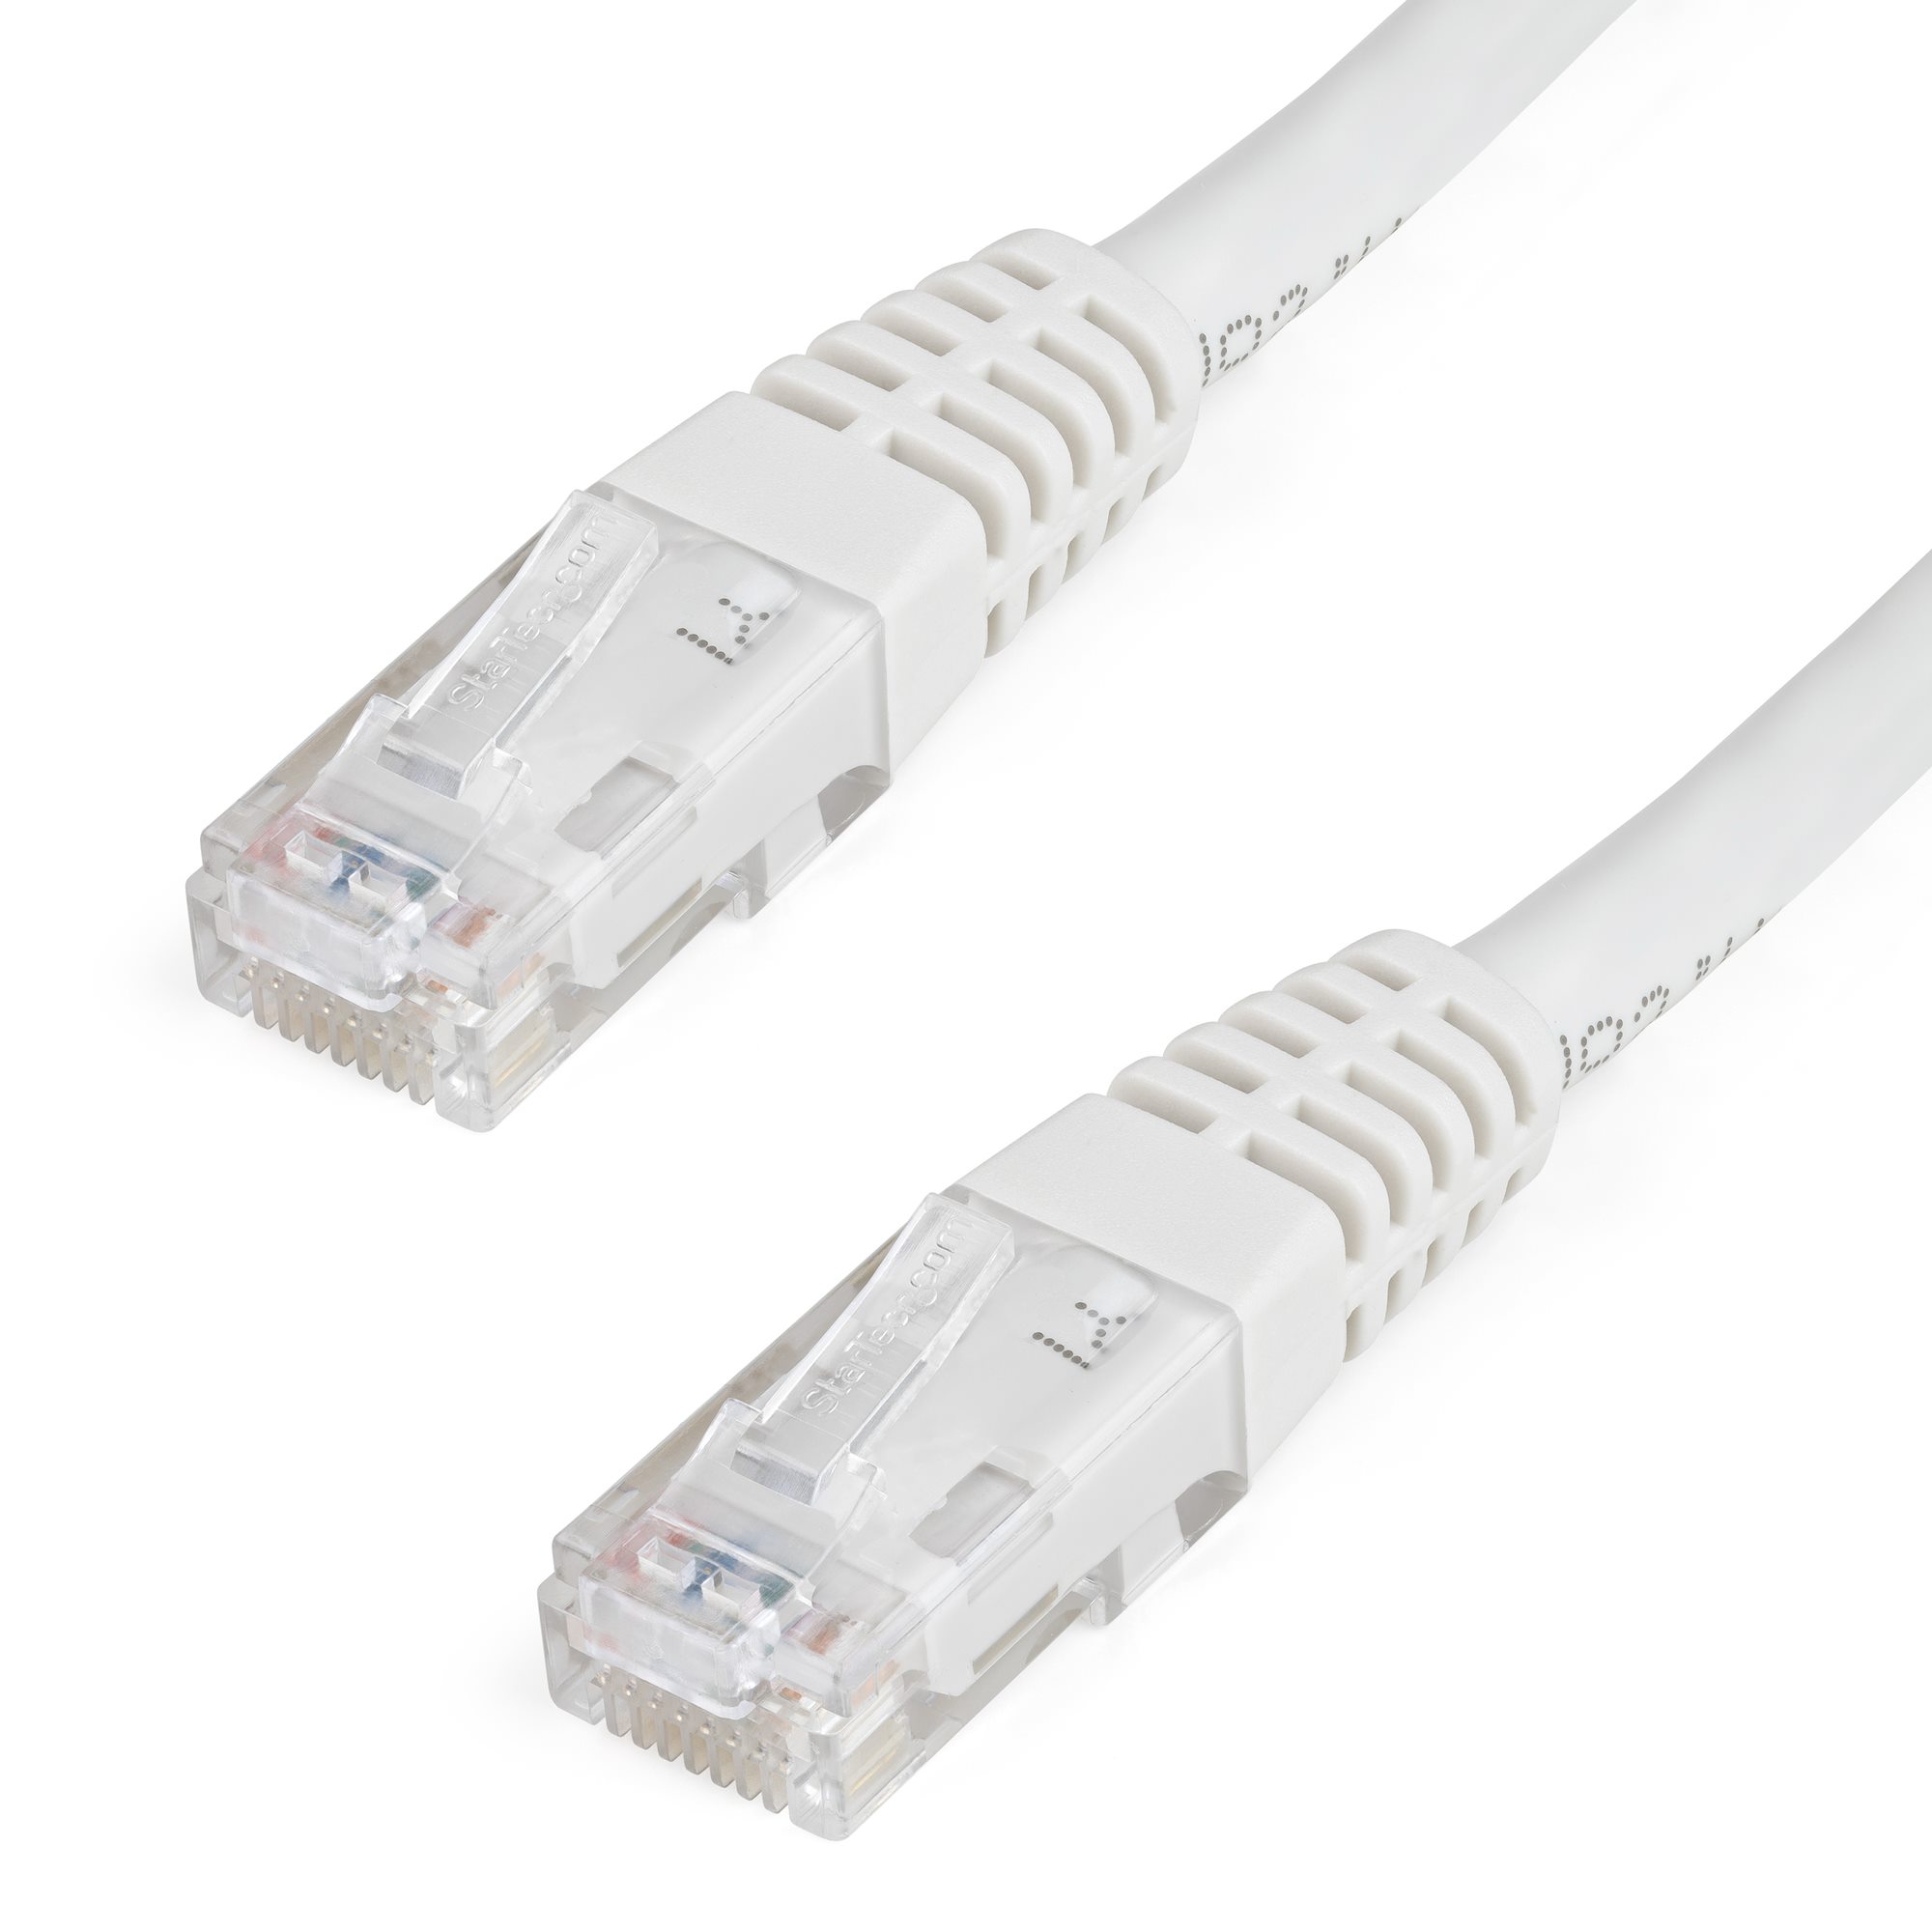 Black cable rj45 ethernet 10'' 25cm network cats patch^cord internets cat6 wire 